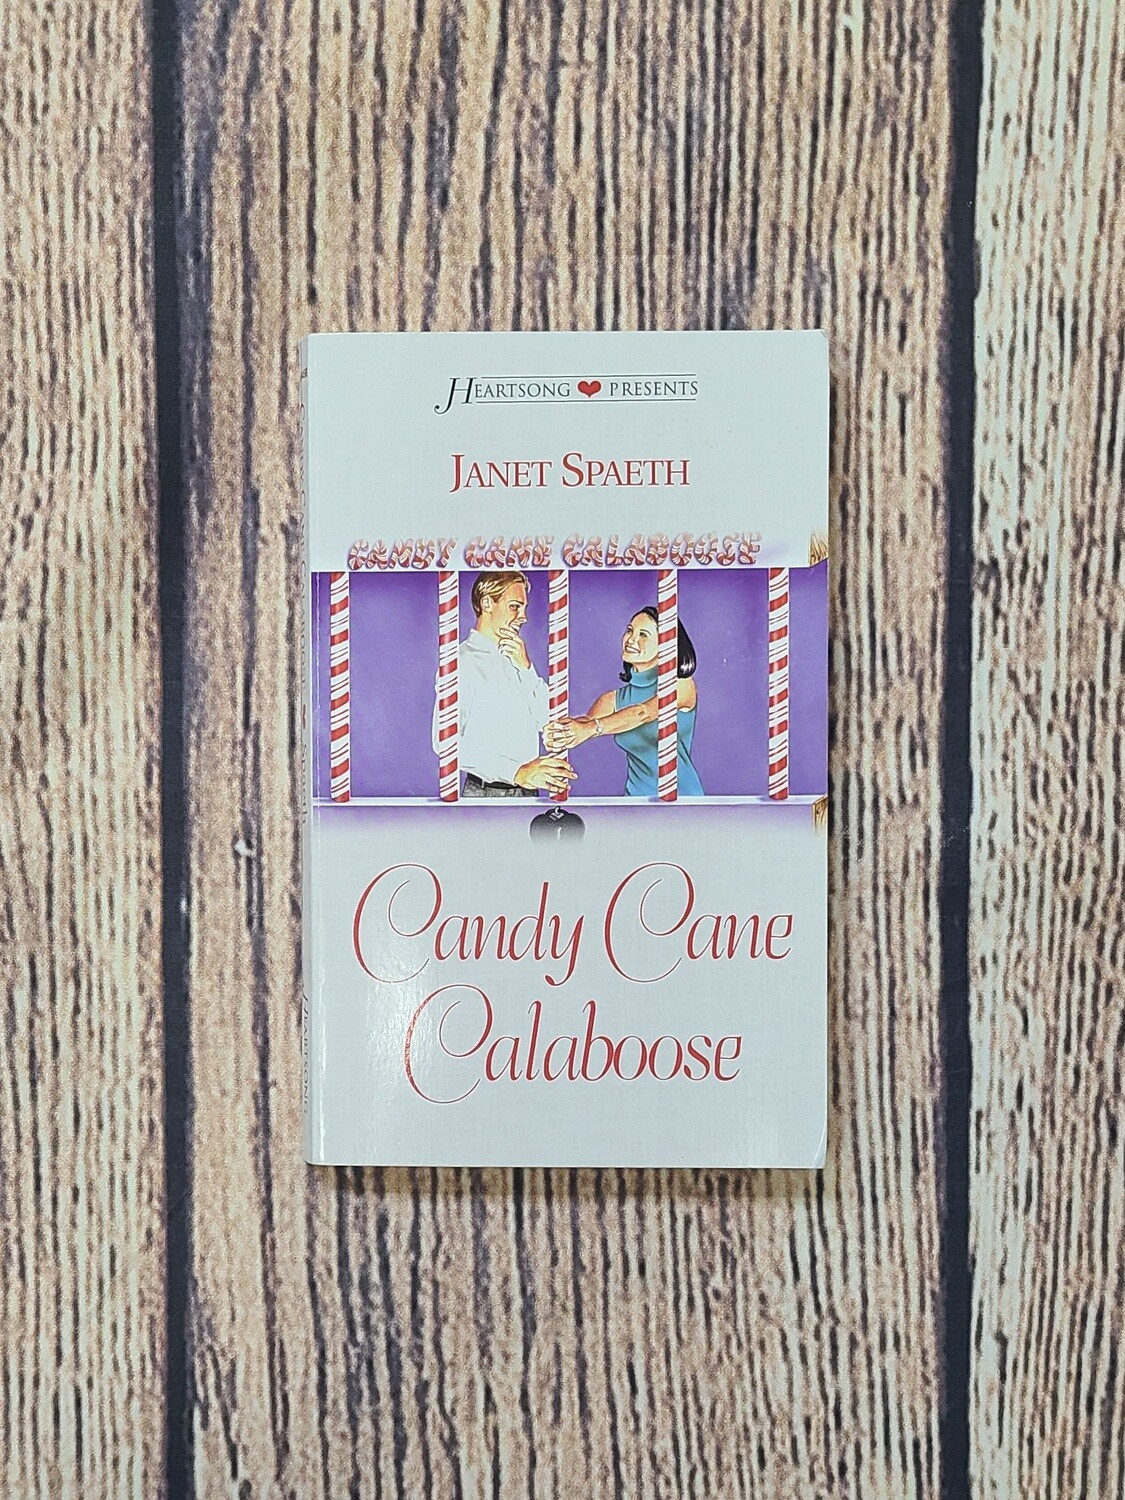 Candy Cane Calaboose by Janet Spaeth